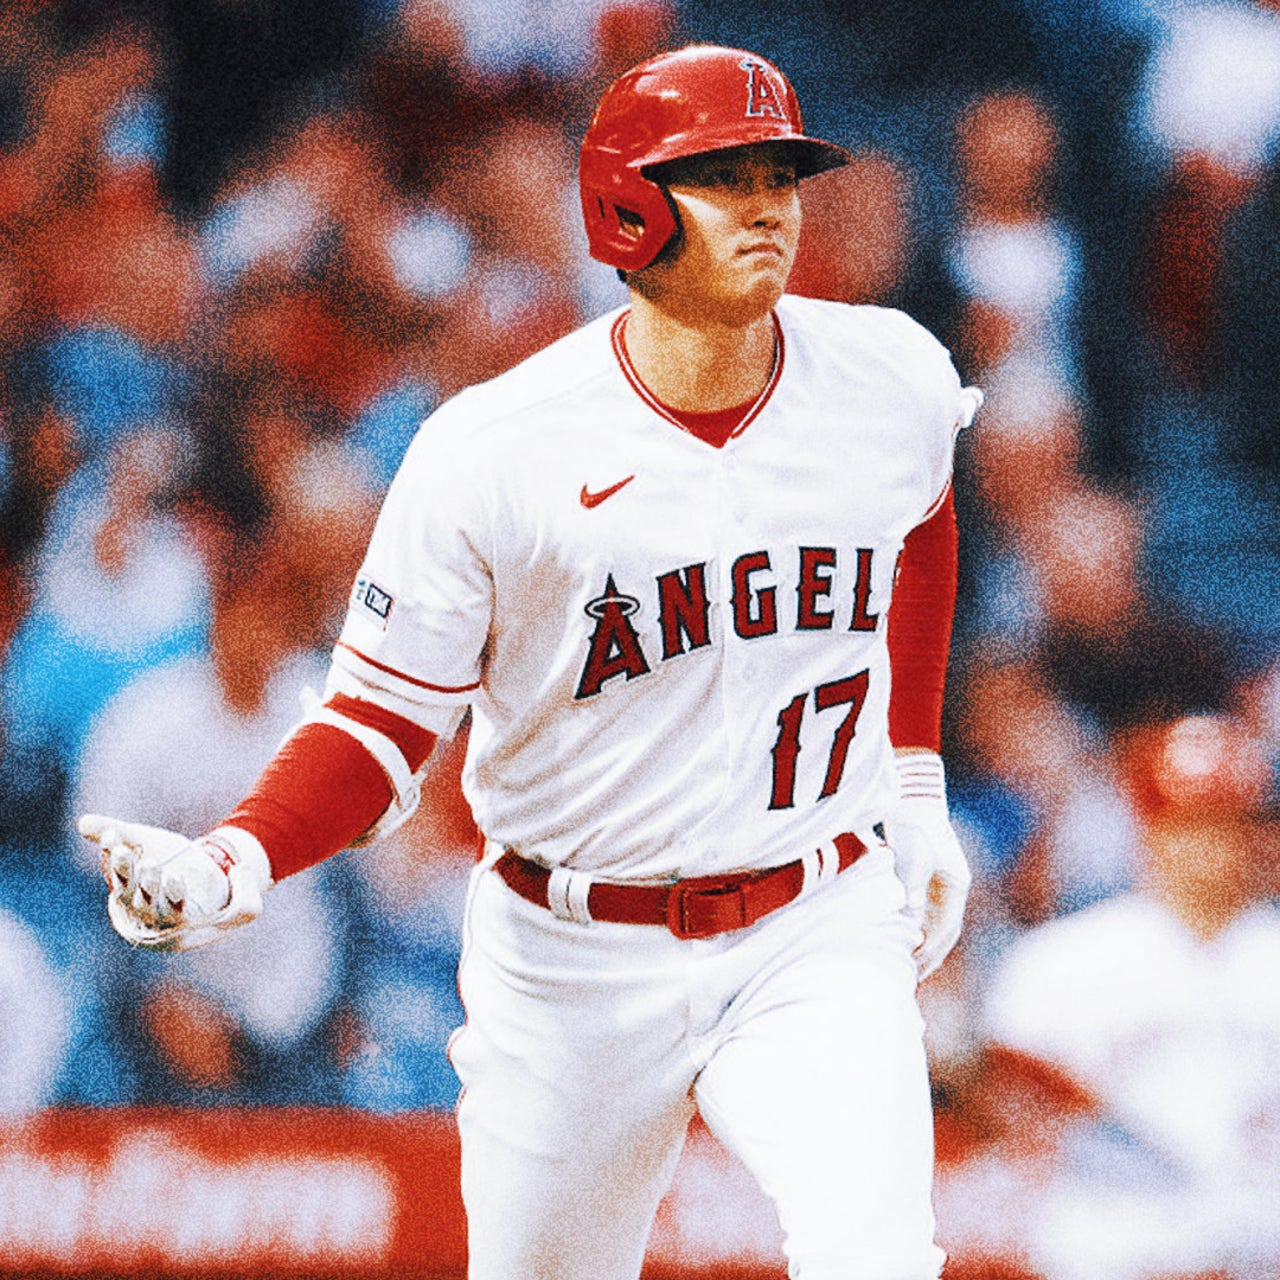 Would Keith Hernandez let Shohei Ohtani wear his No. 17 with Mets? – NBC  New York